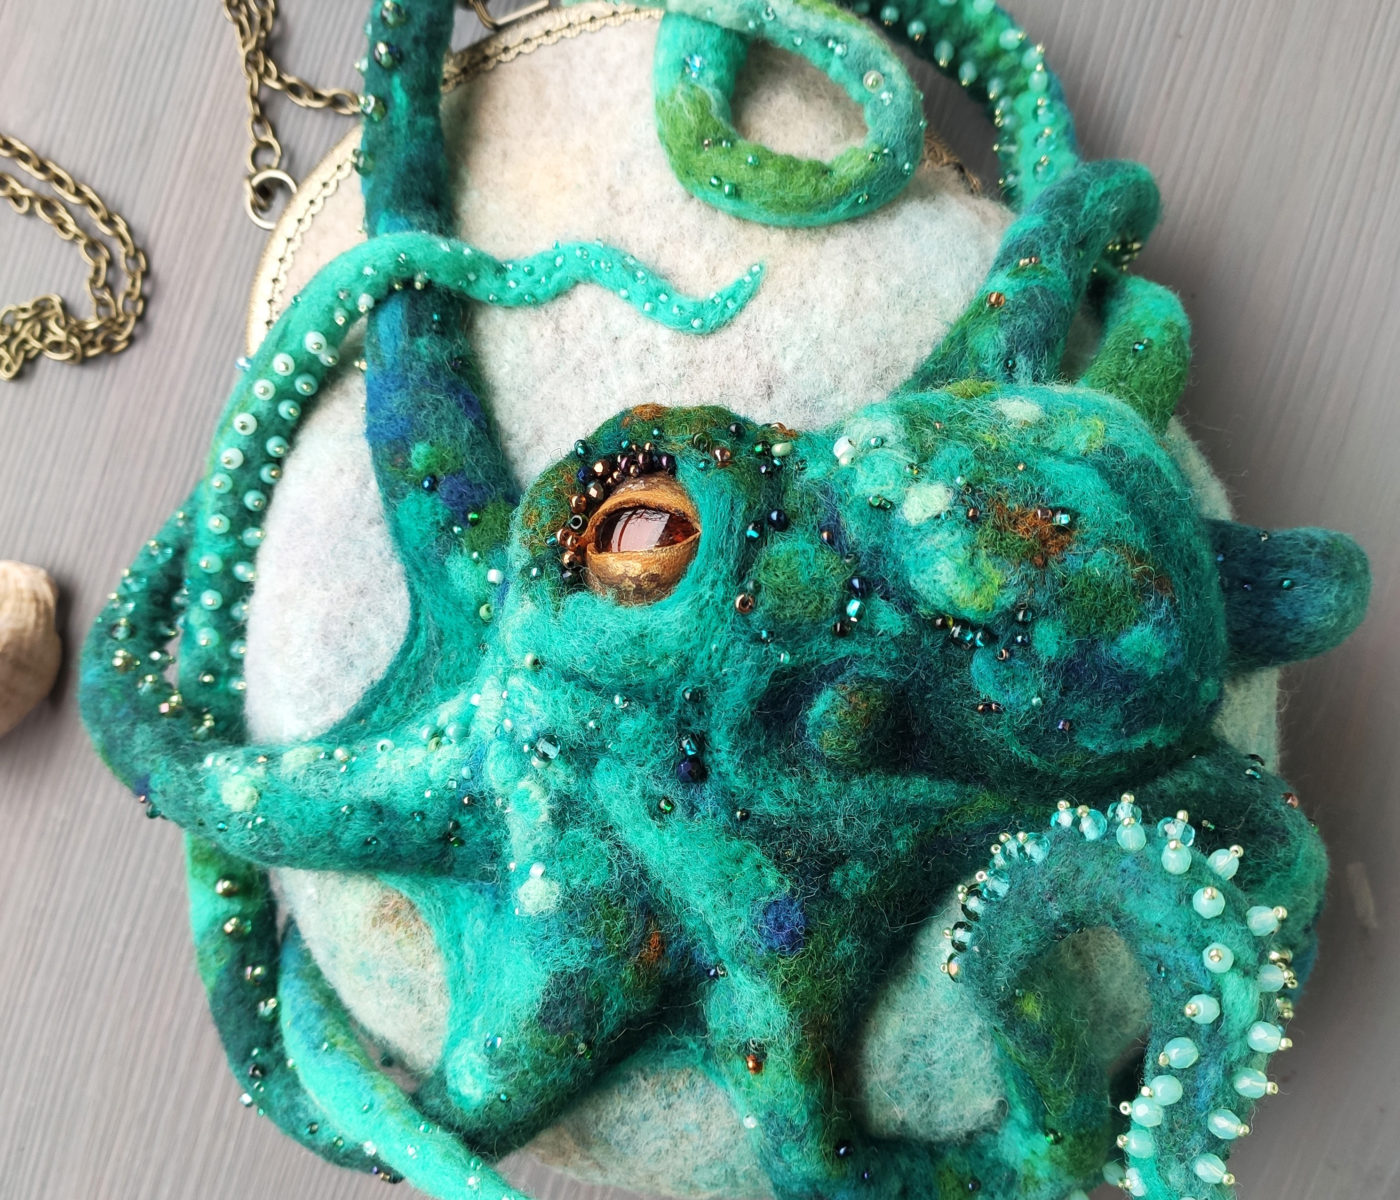 Turquoise octopus felt bag with bead embroidery